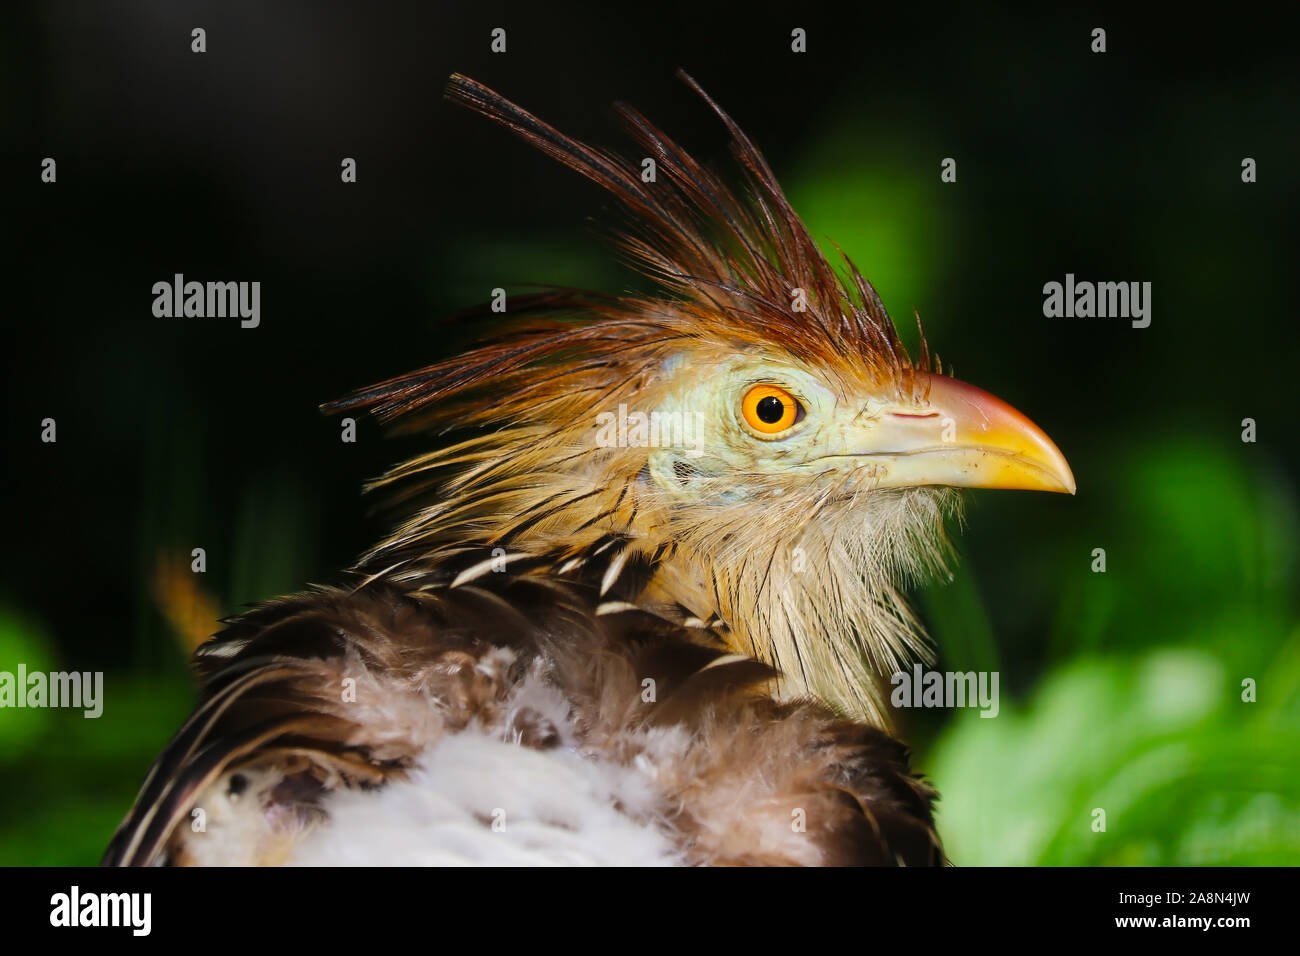 Head of a shaggy guira cuckoo in side view Stock Photo